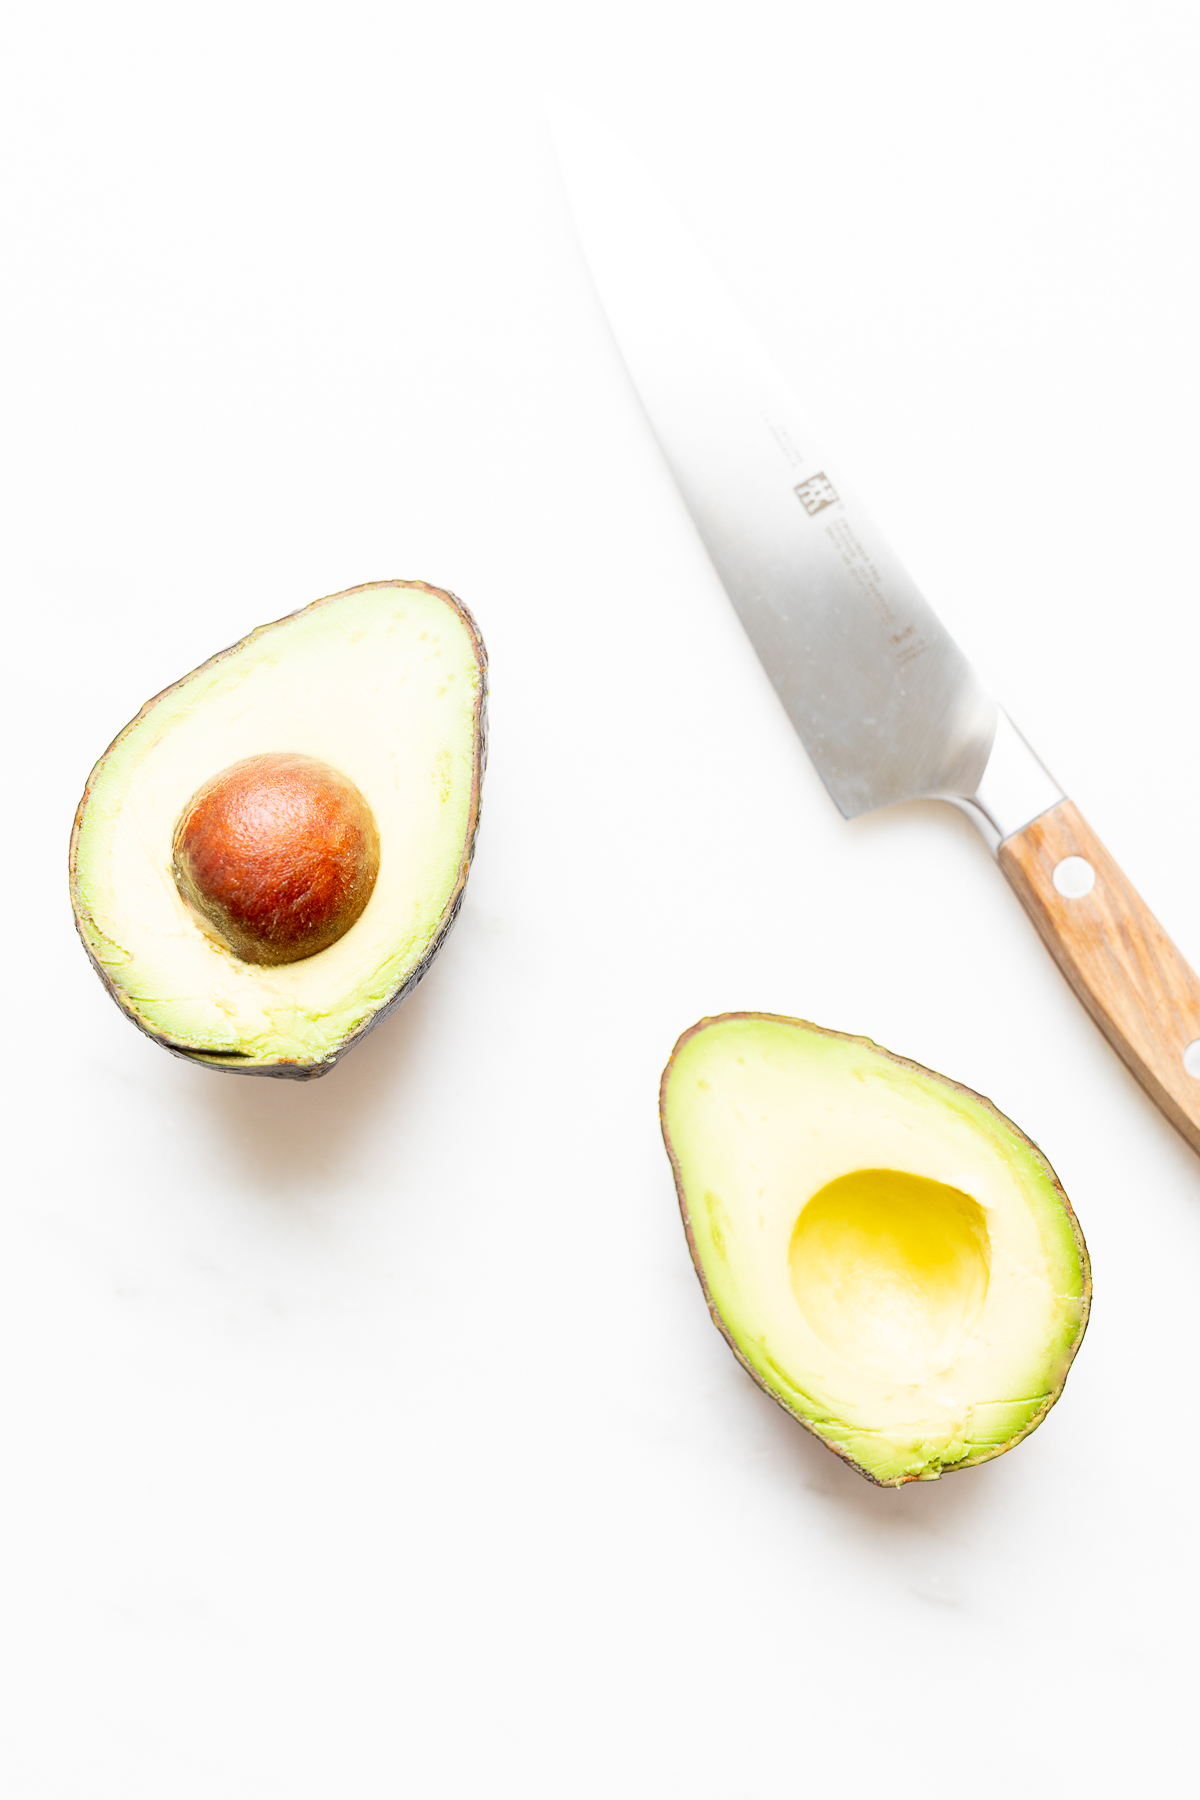 A fresh avocado, sliced down the center with a knife to the side.